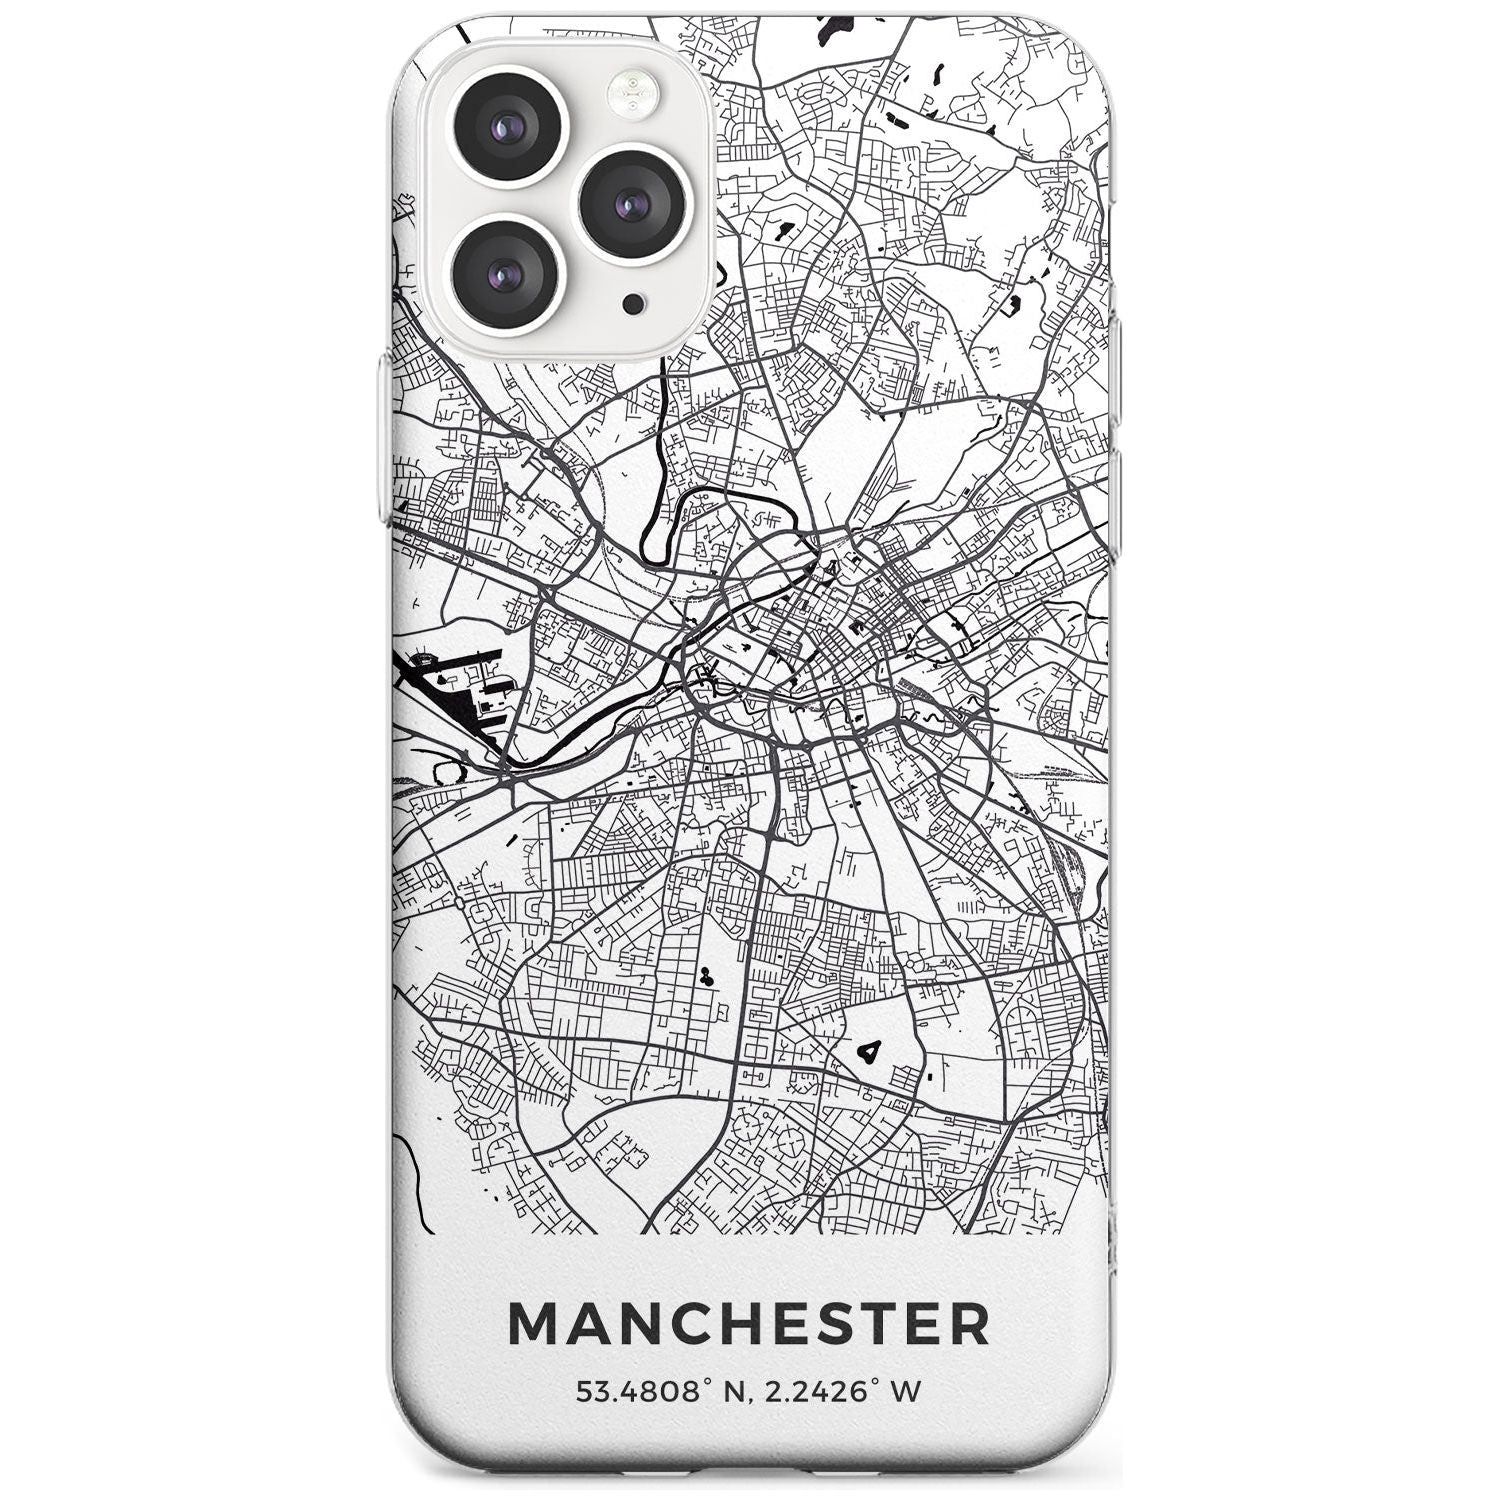 Map of Manchester, England Slim TPU Phone Case for iPhone 11 Pro Max